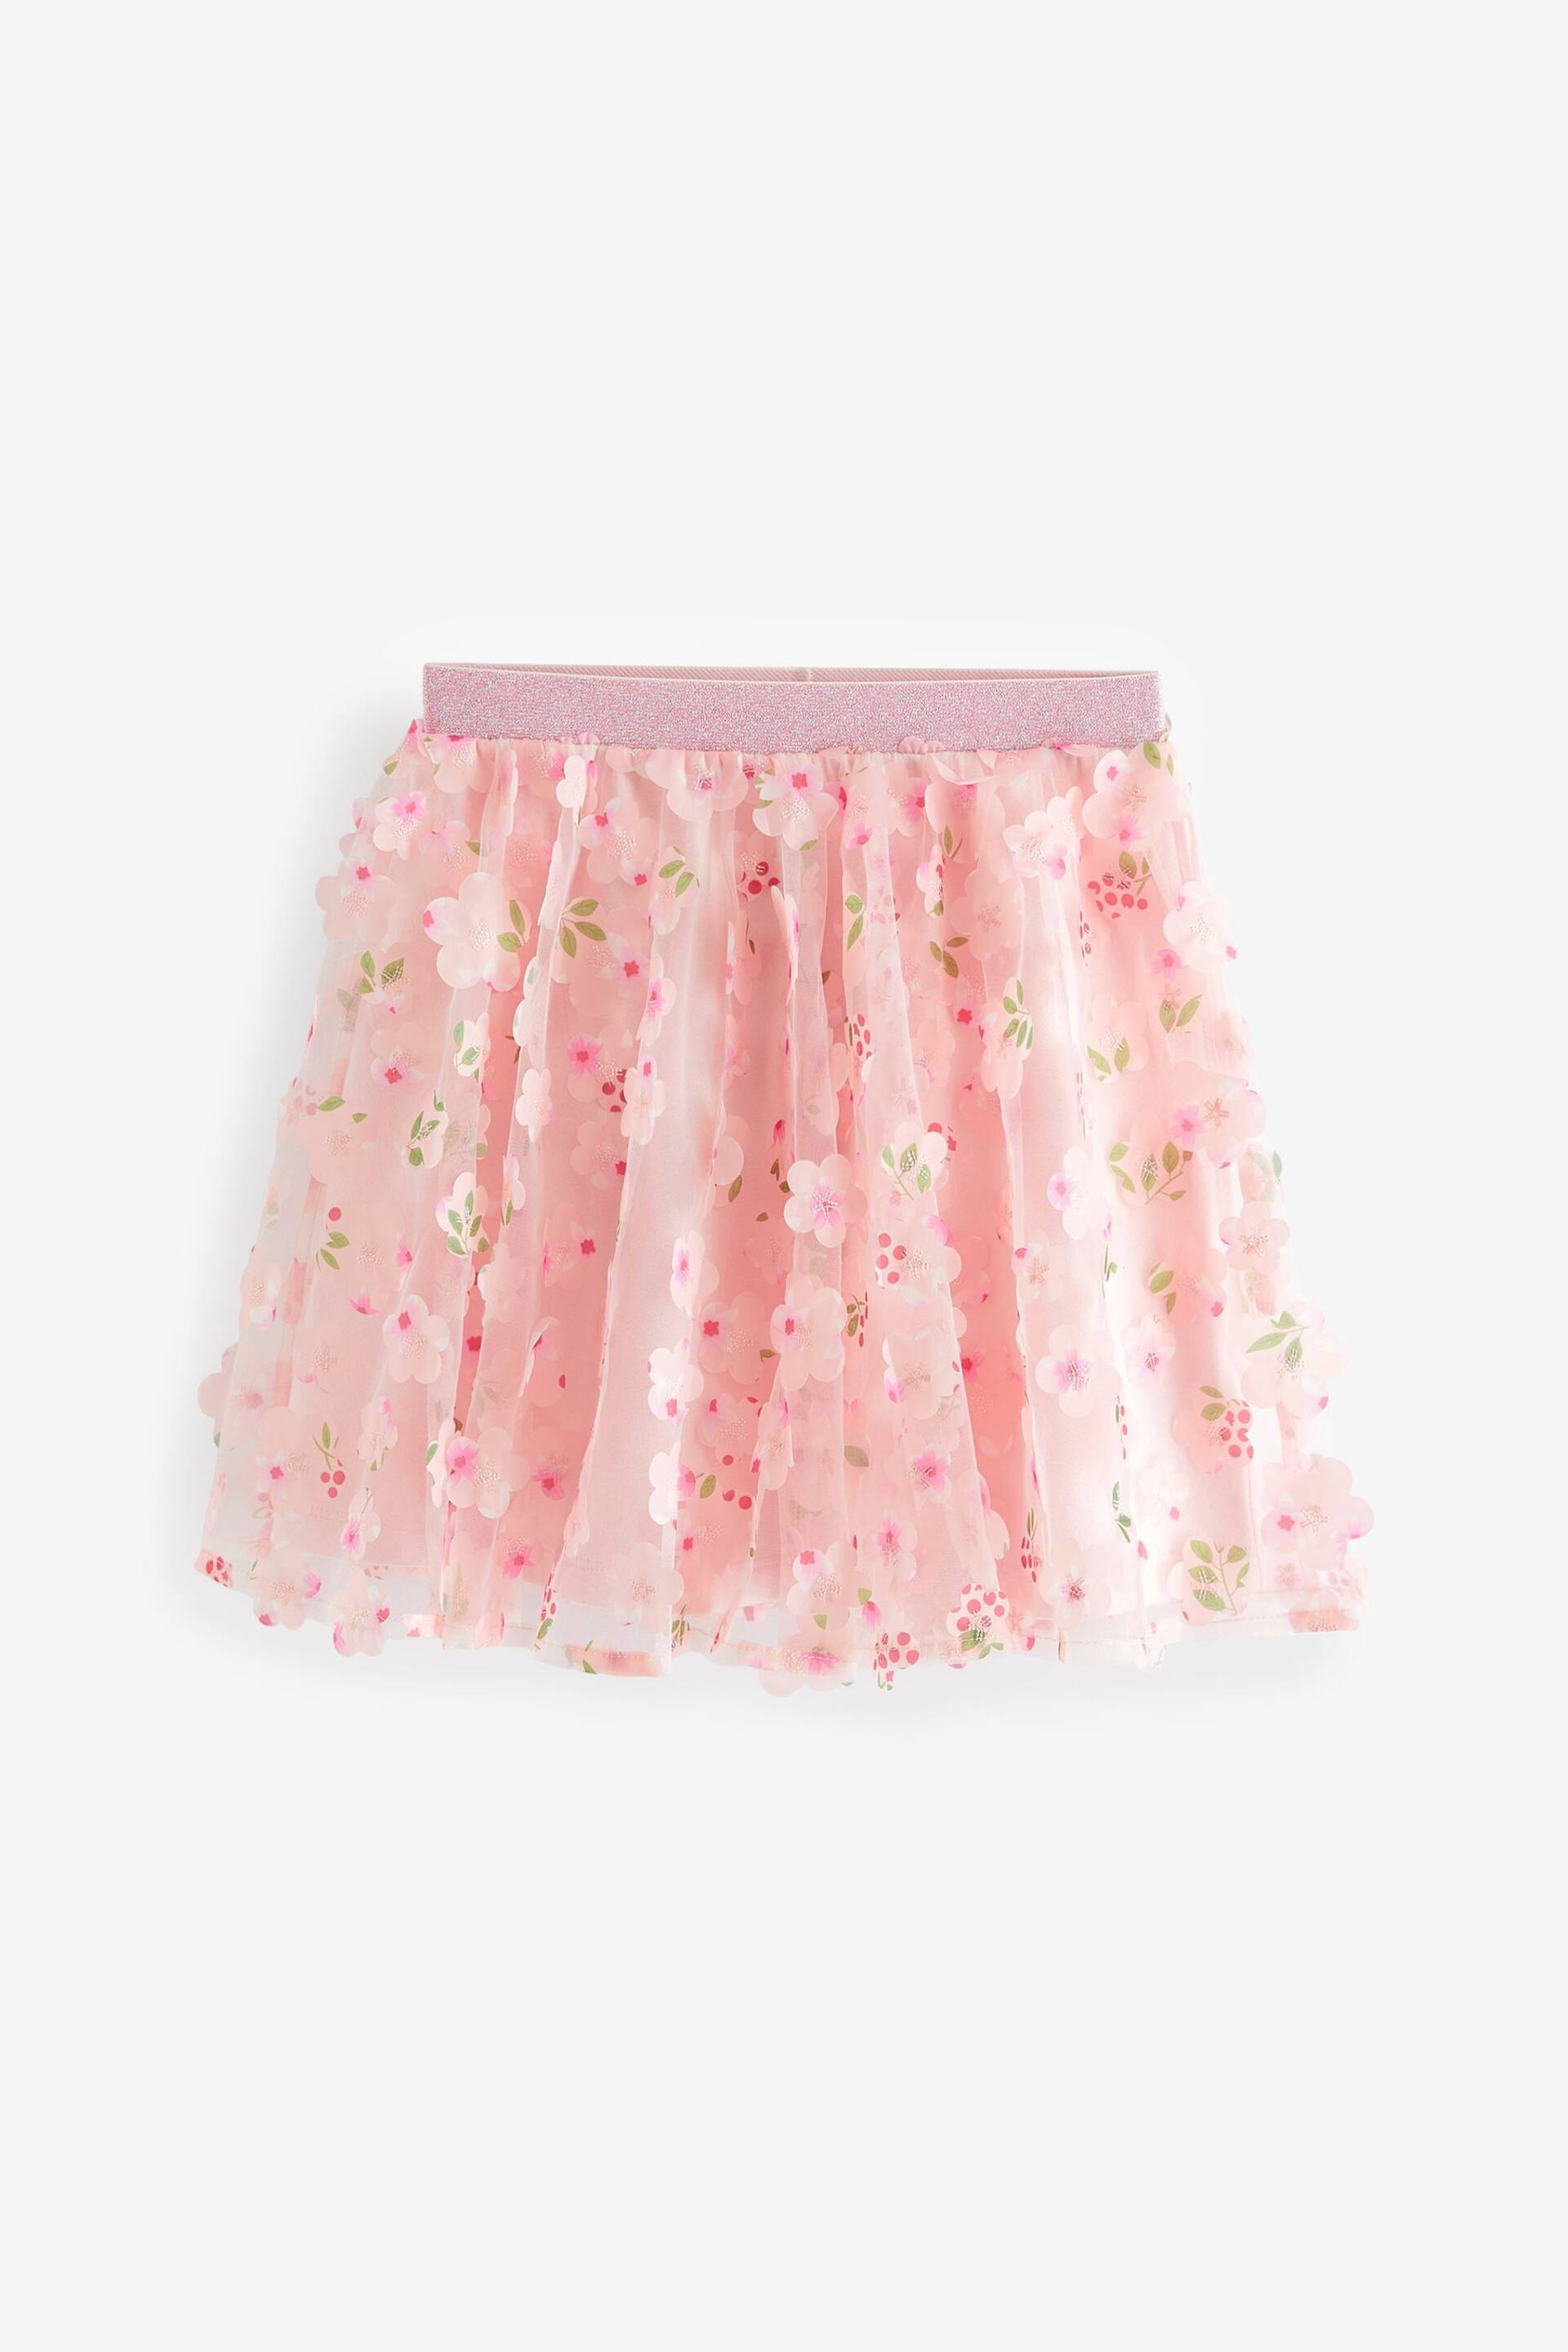 Blush Pink 3D Floral Pull-On Skirt (3-16yrs) - Image 6 of 7